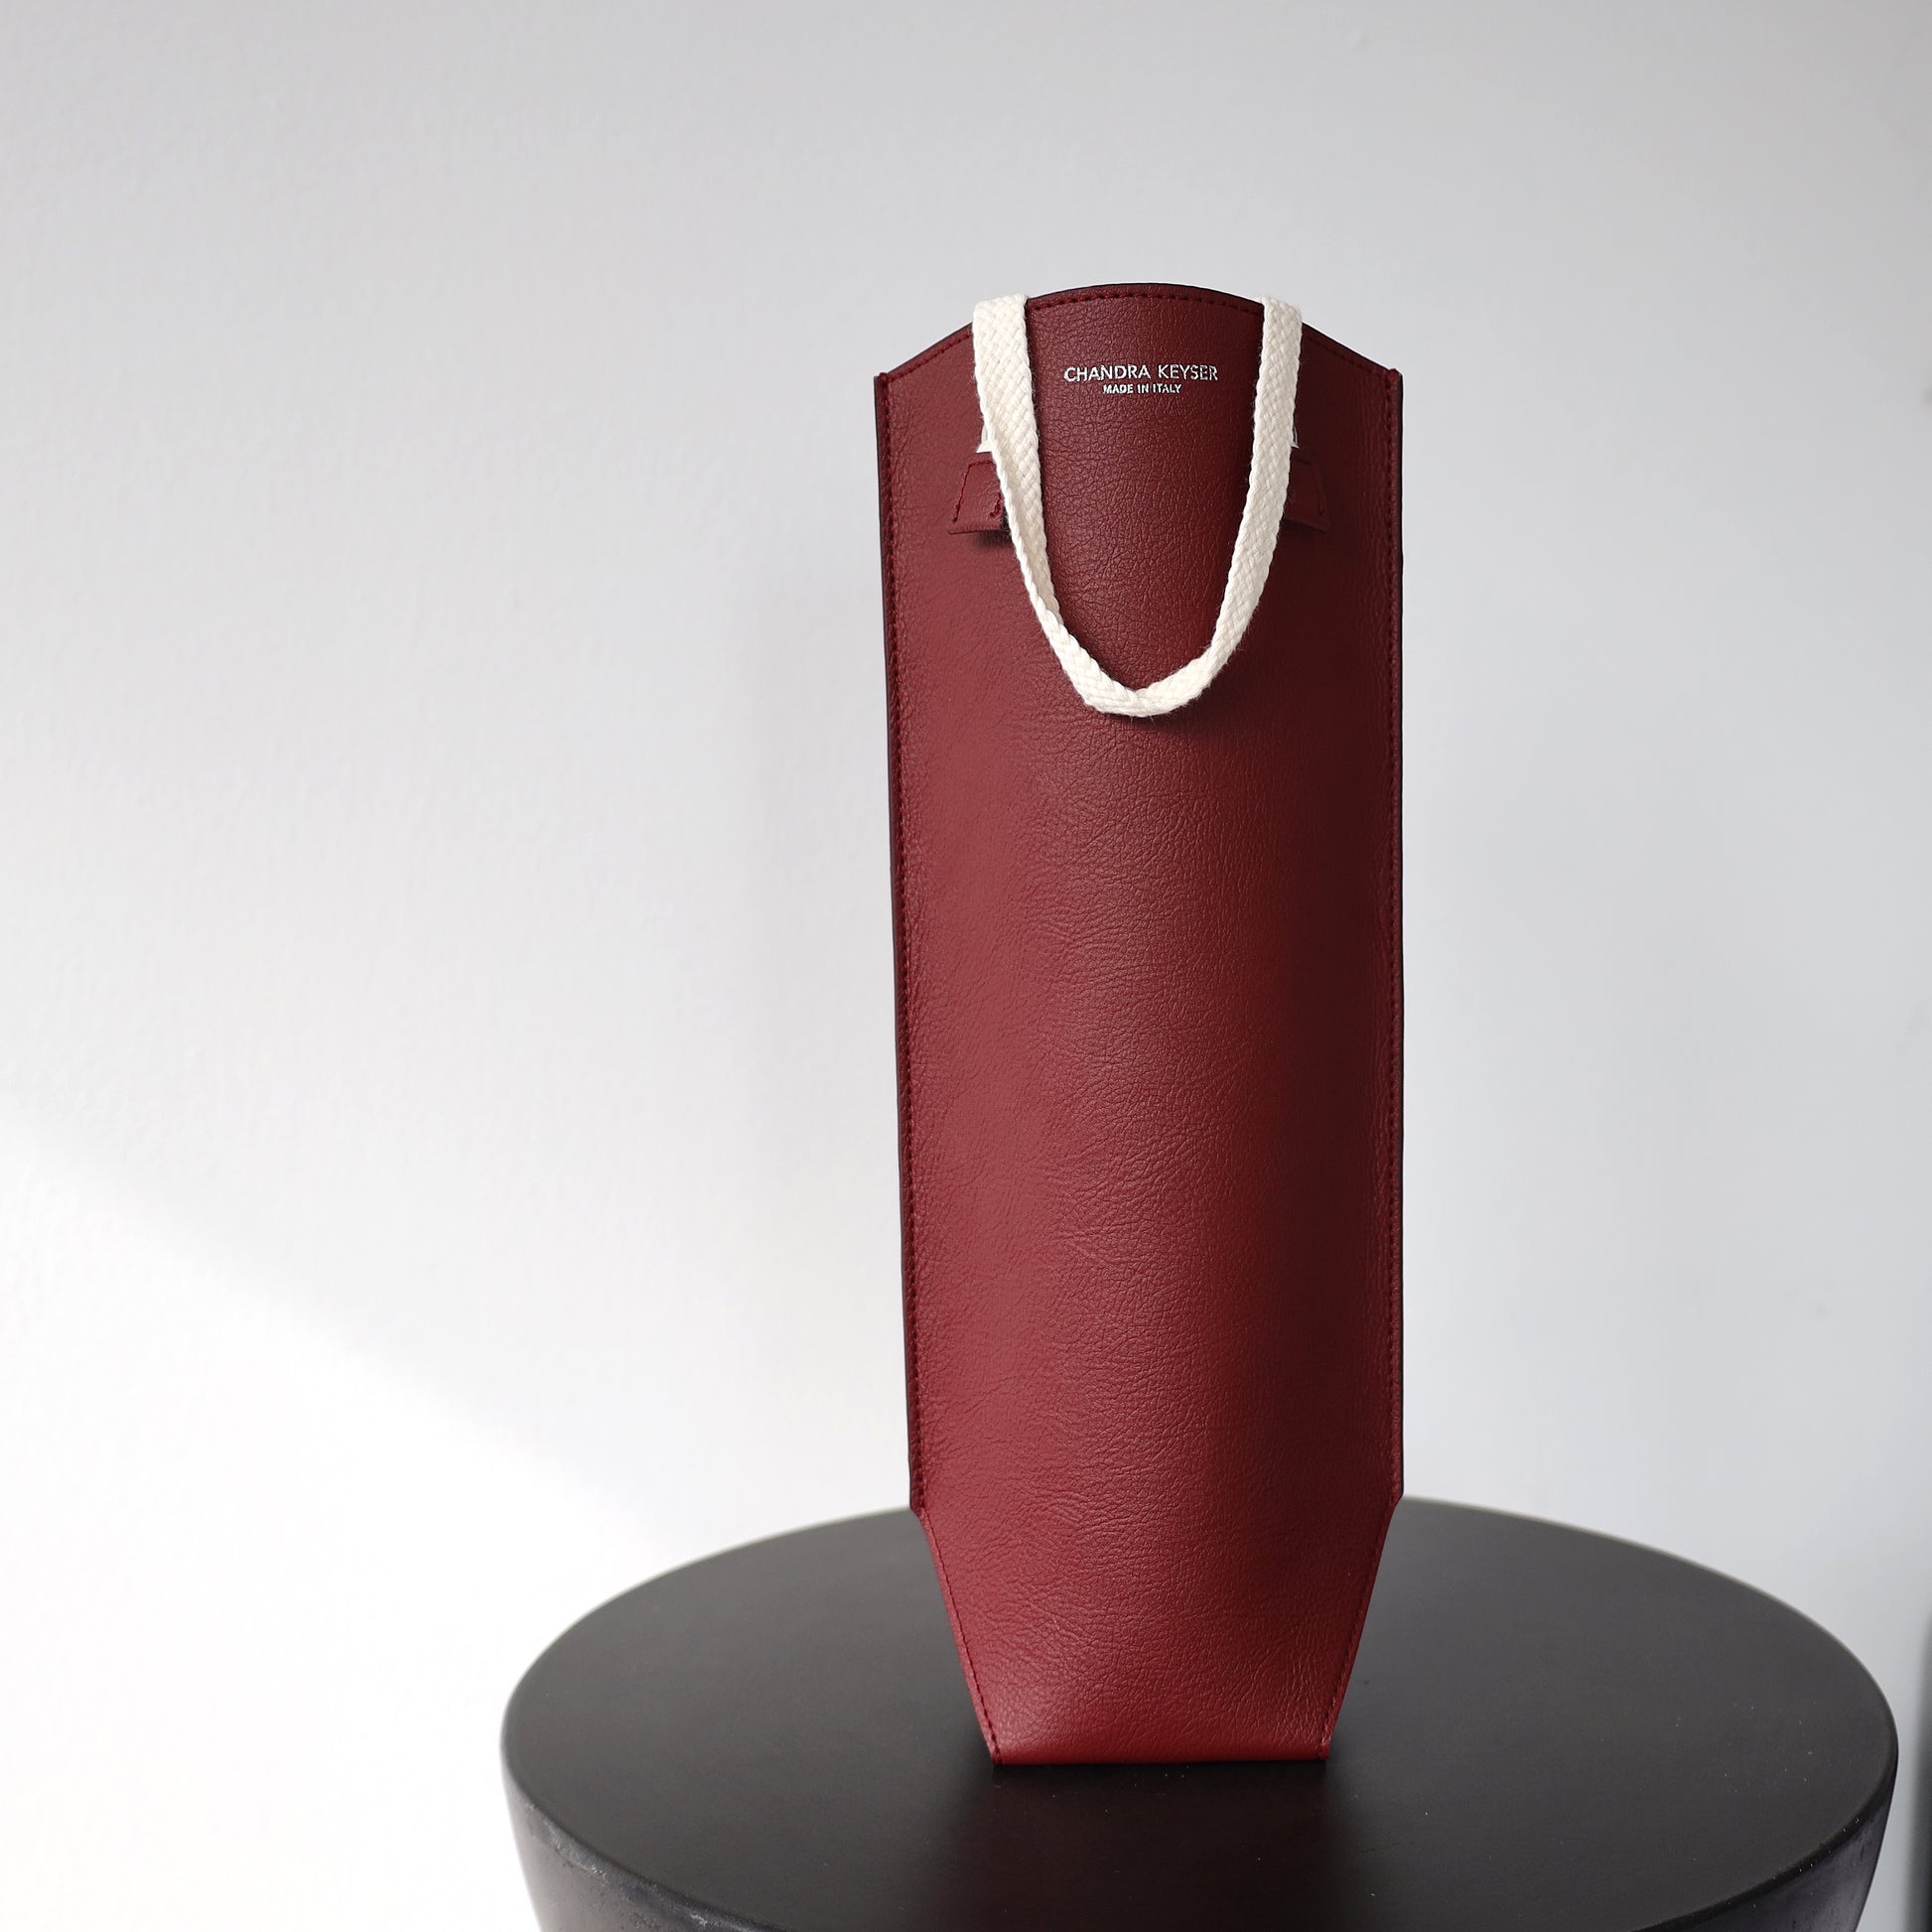 Bordeaux Bag Wine Carrier Sustainable Luxury Gift Circular Product Supports the Environment sitting on a round table with white wall in the background